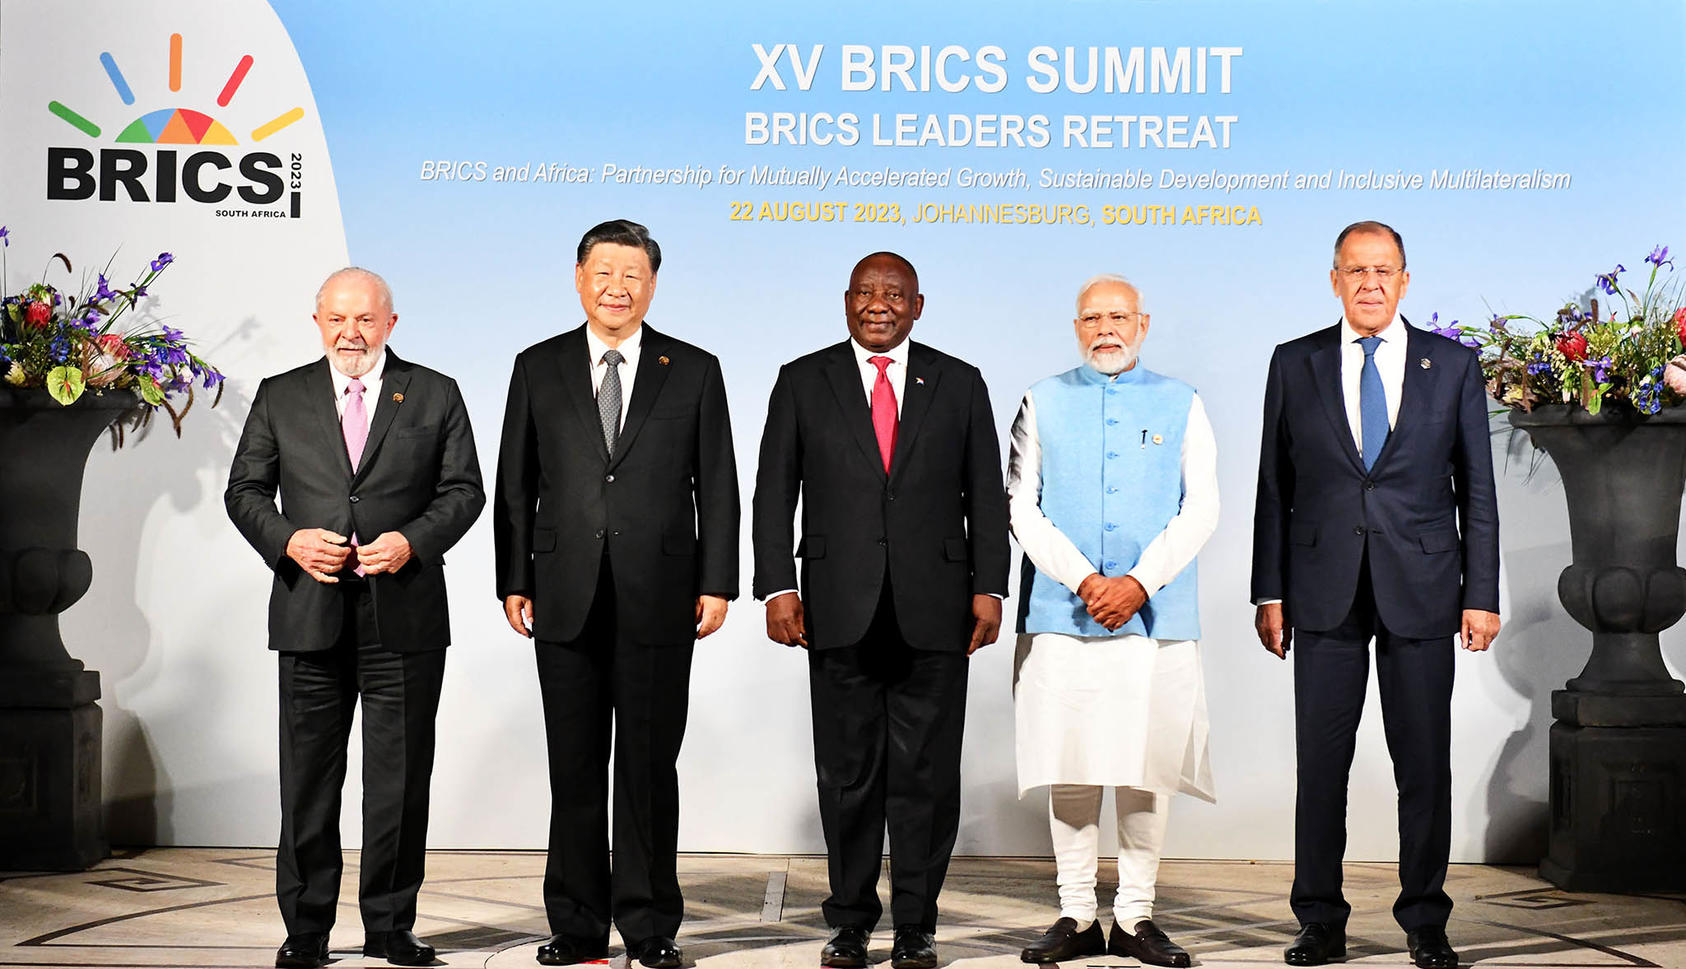 BRICS Expansion is Positive – But Not a Coherent Challenge to US Power